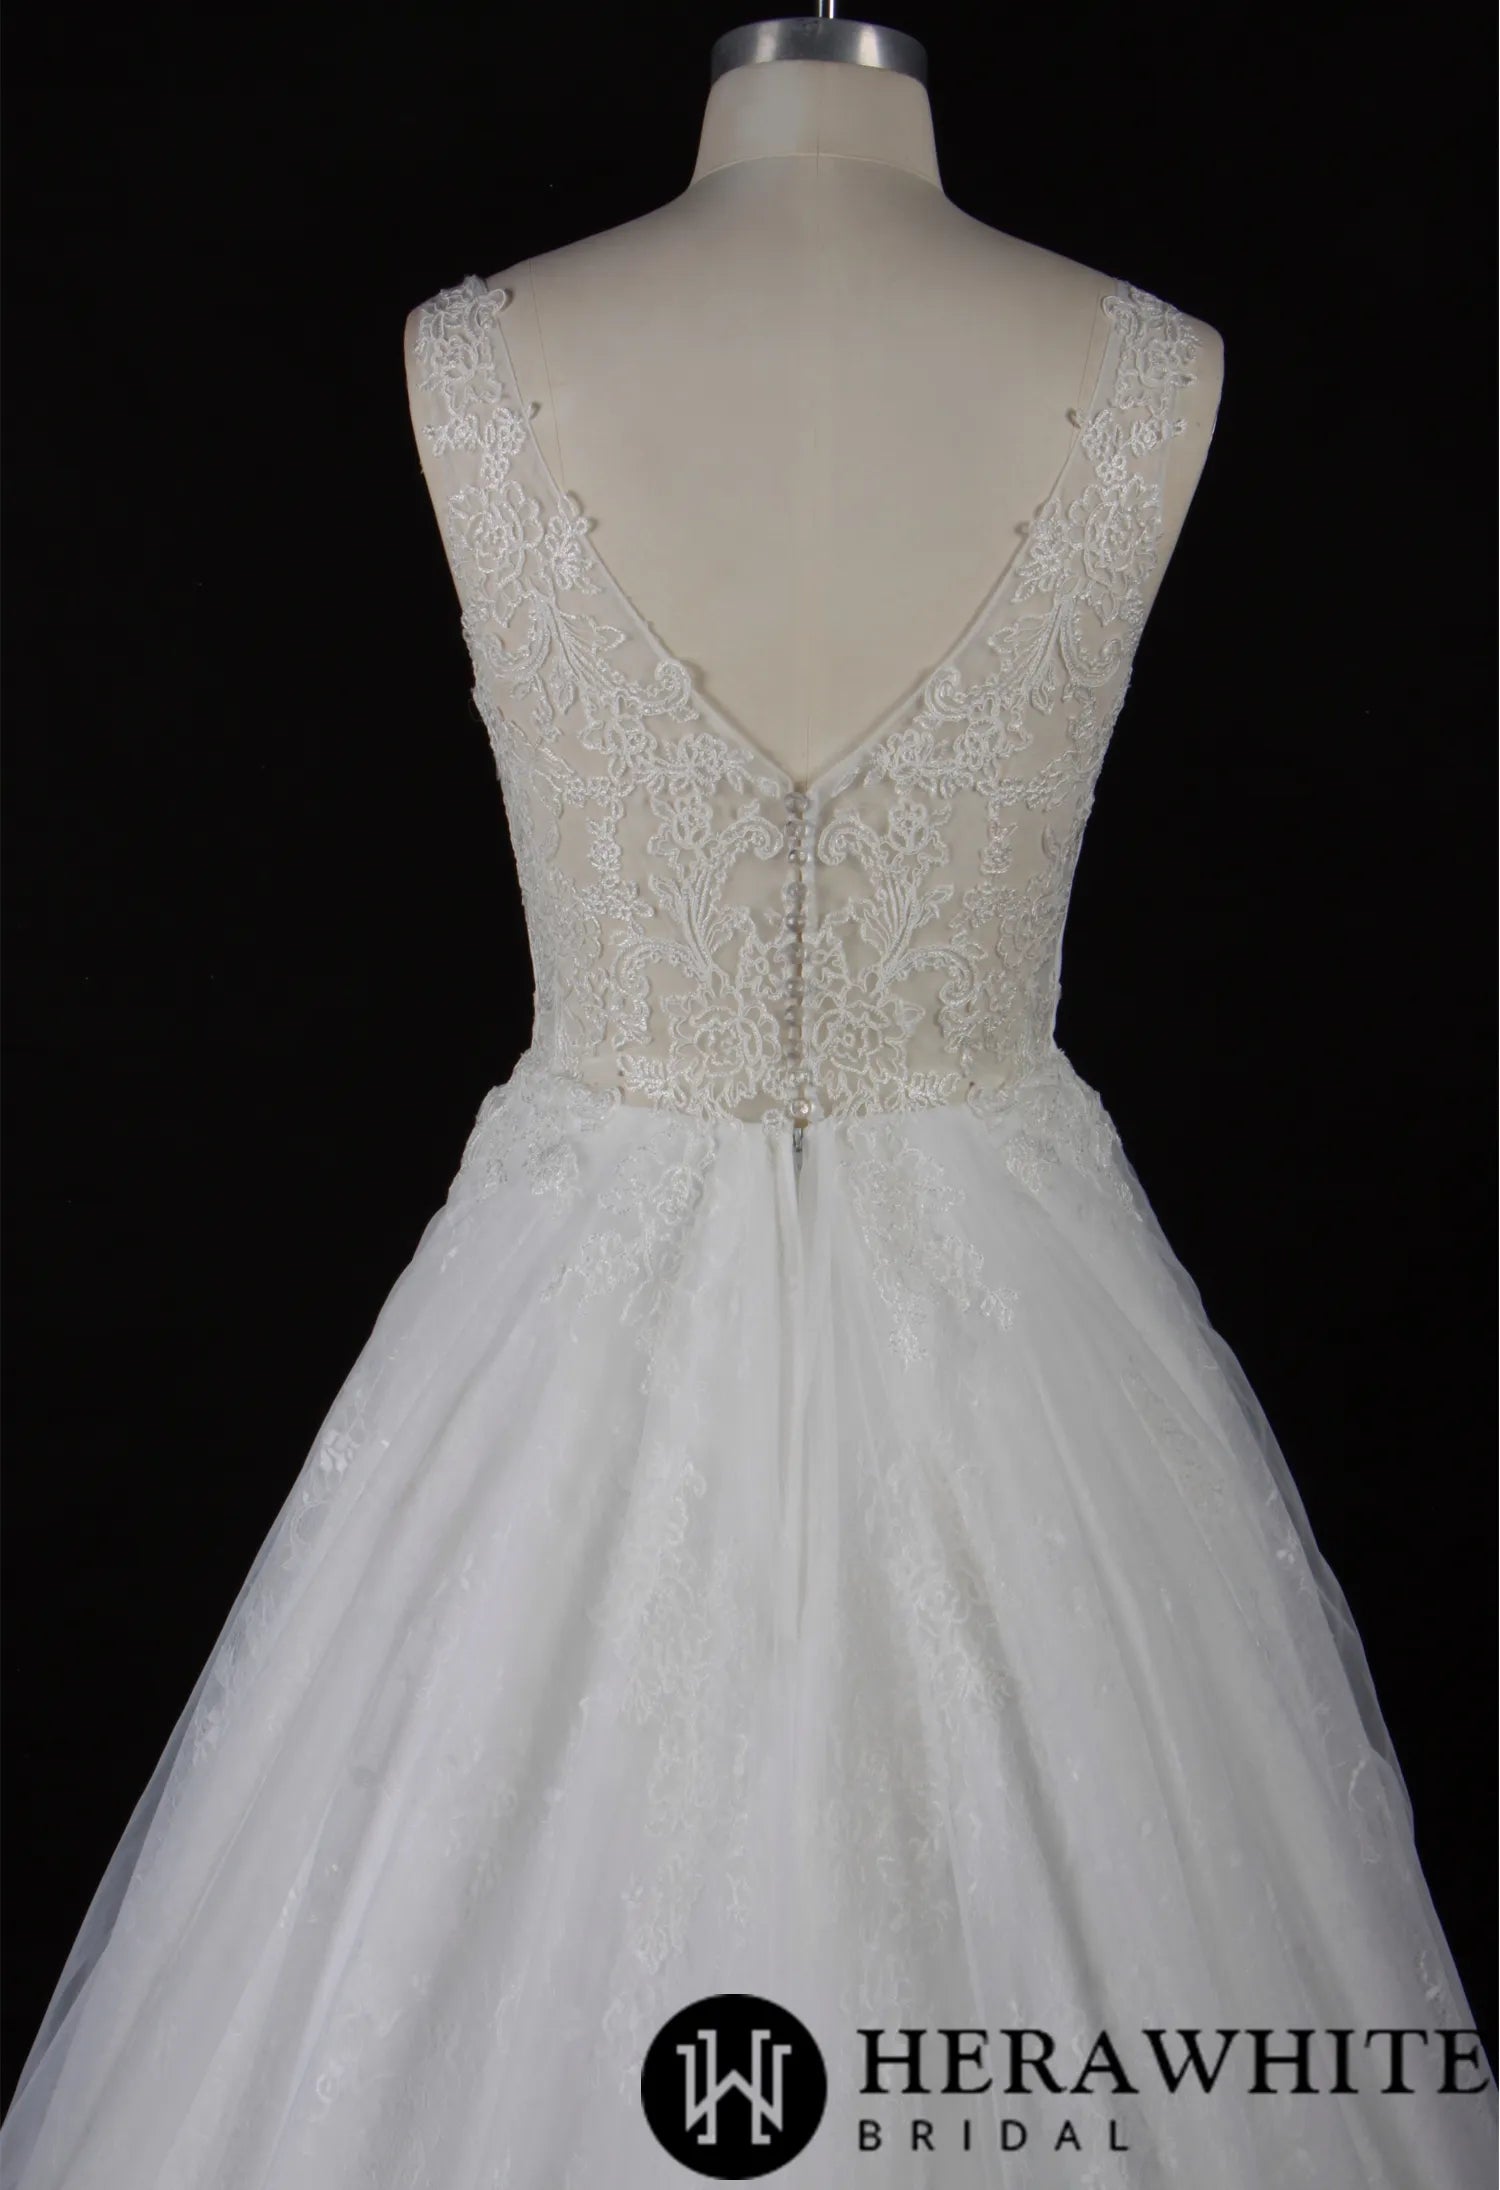 Illusion V Neckline Lace Bridal Gown With Beading Belt